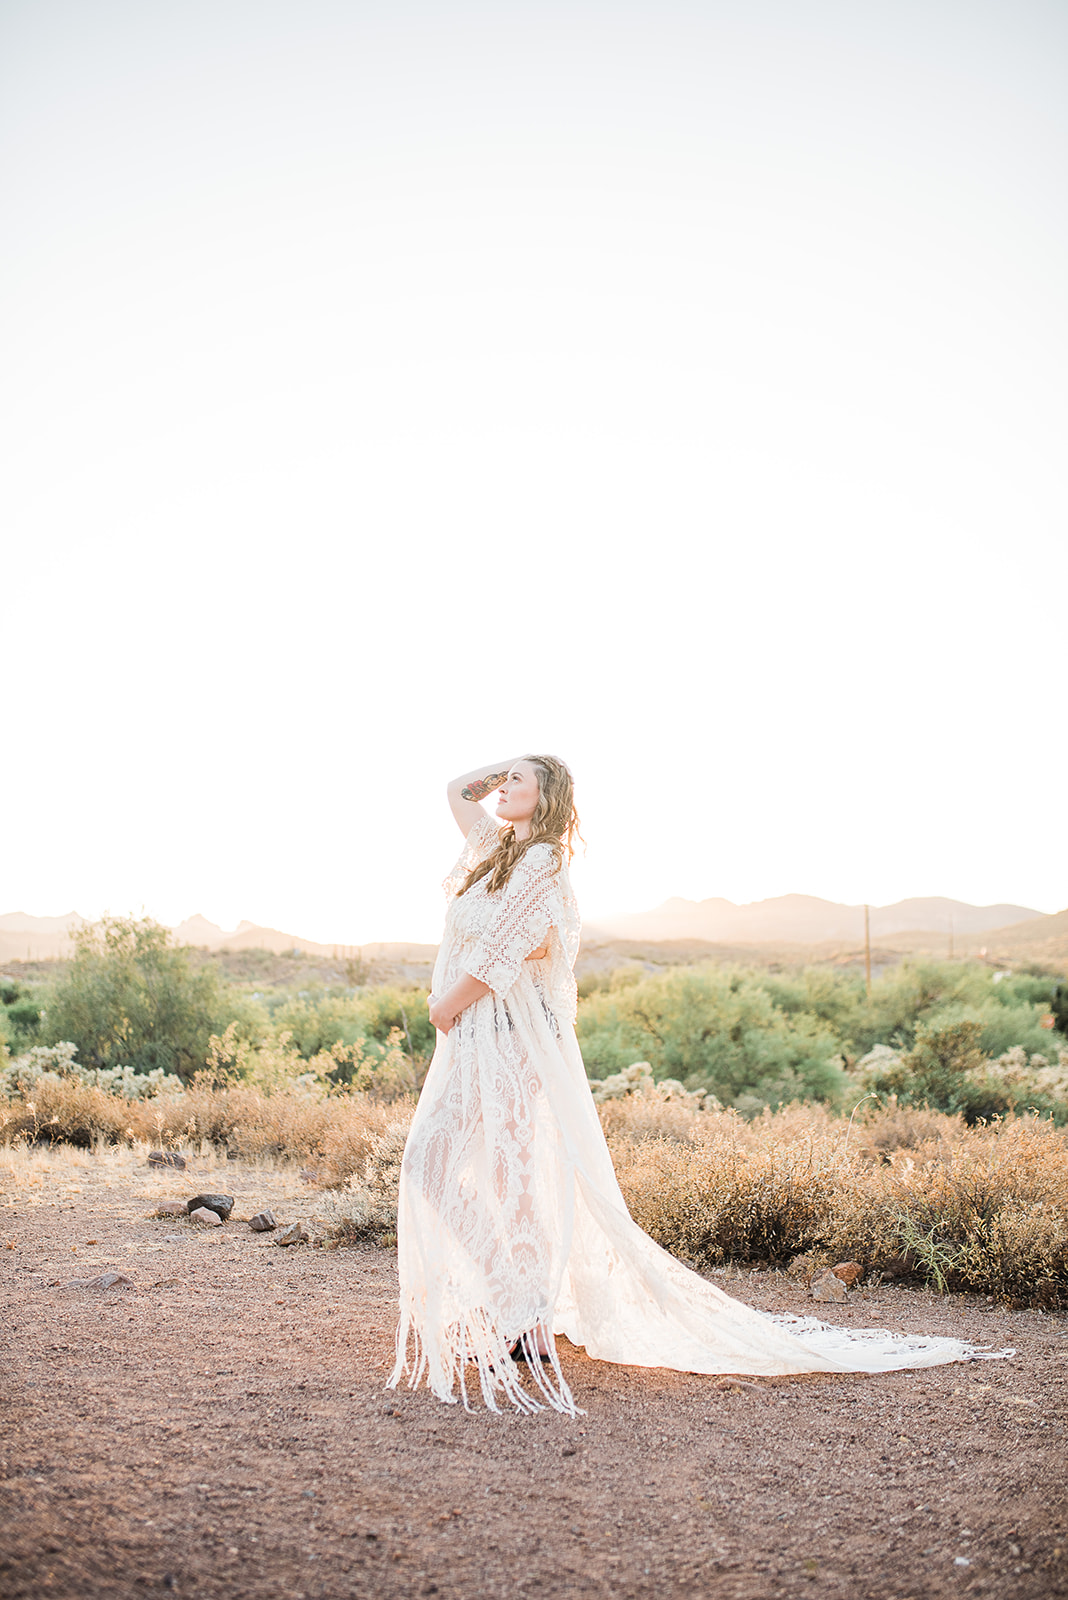 A mom to be in a long white lace dress stands in a desert trail at sunset with a hand in her hair after meeting Phoenix Doulas